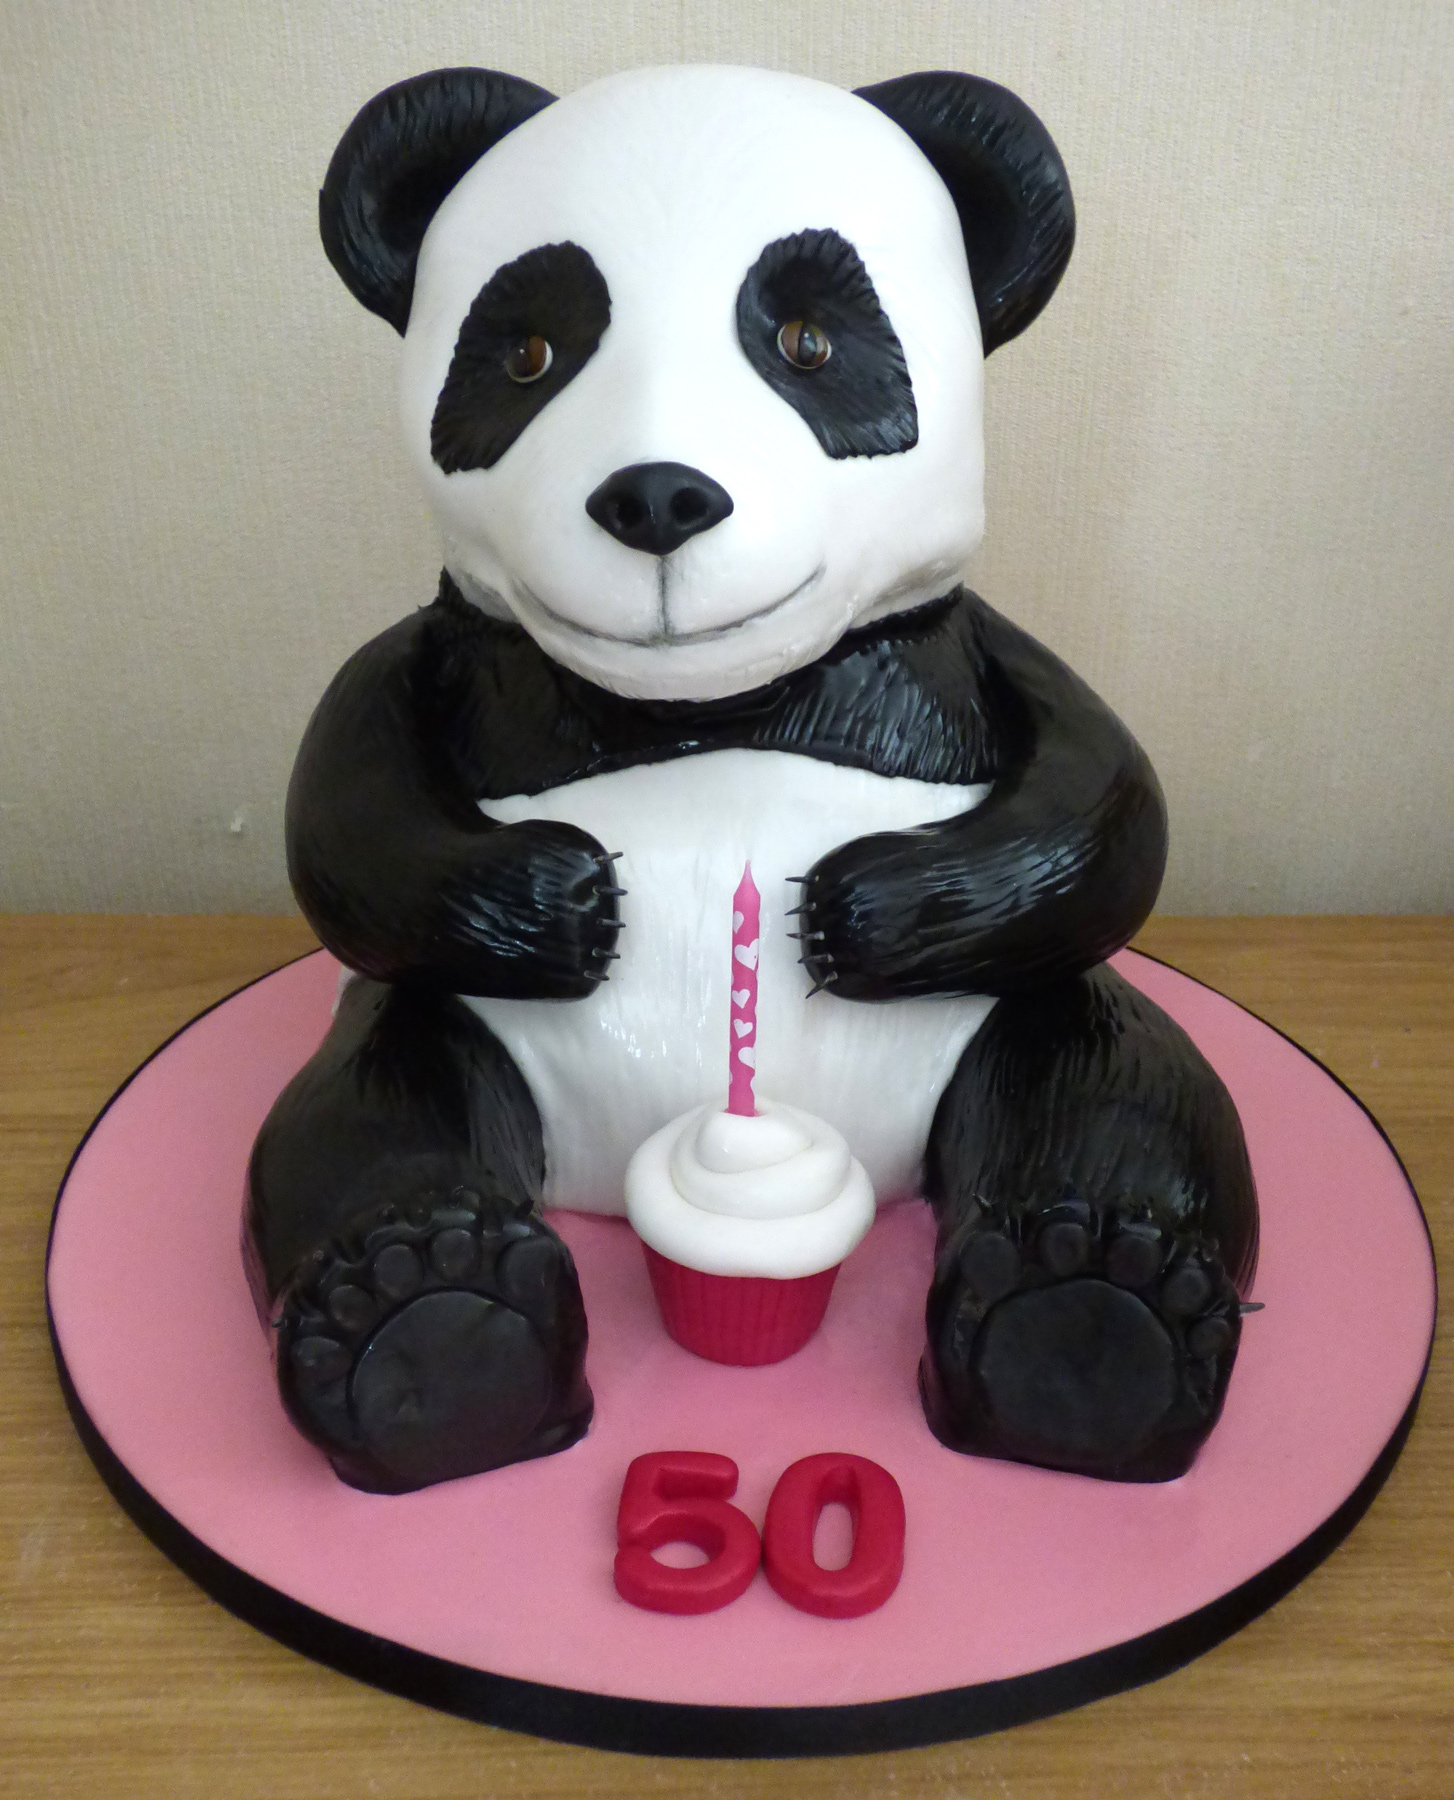 3d panda cake - Decorated Cake by My little cakes - CakesDecor